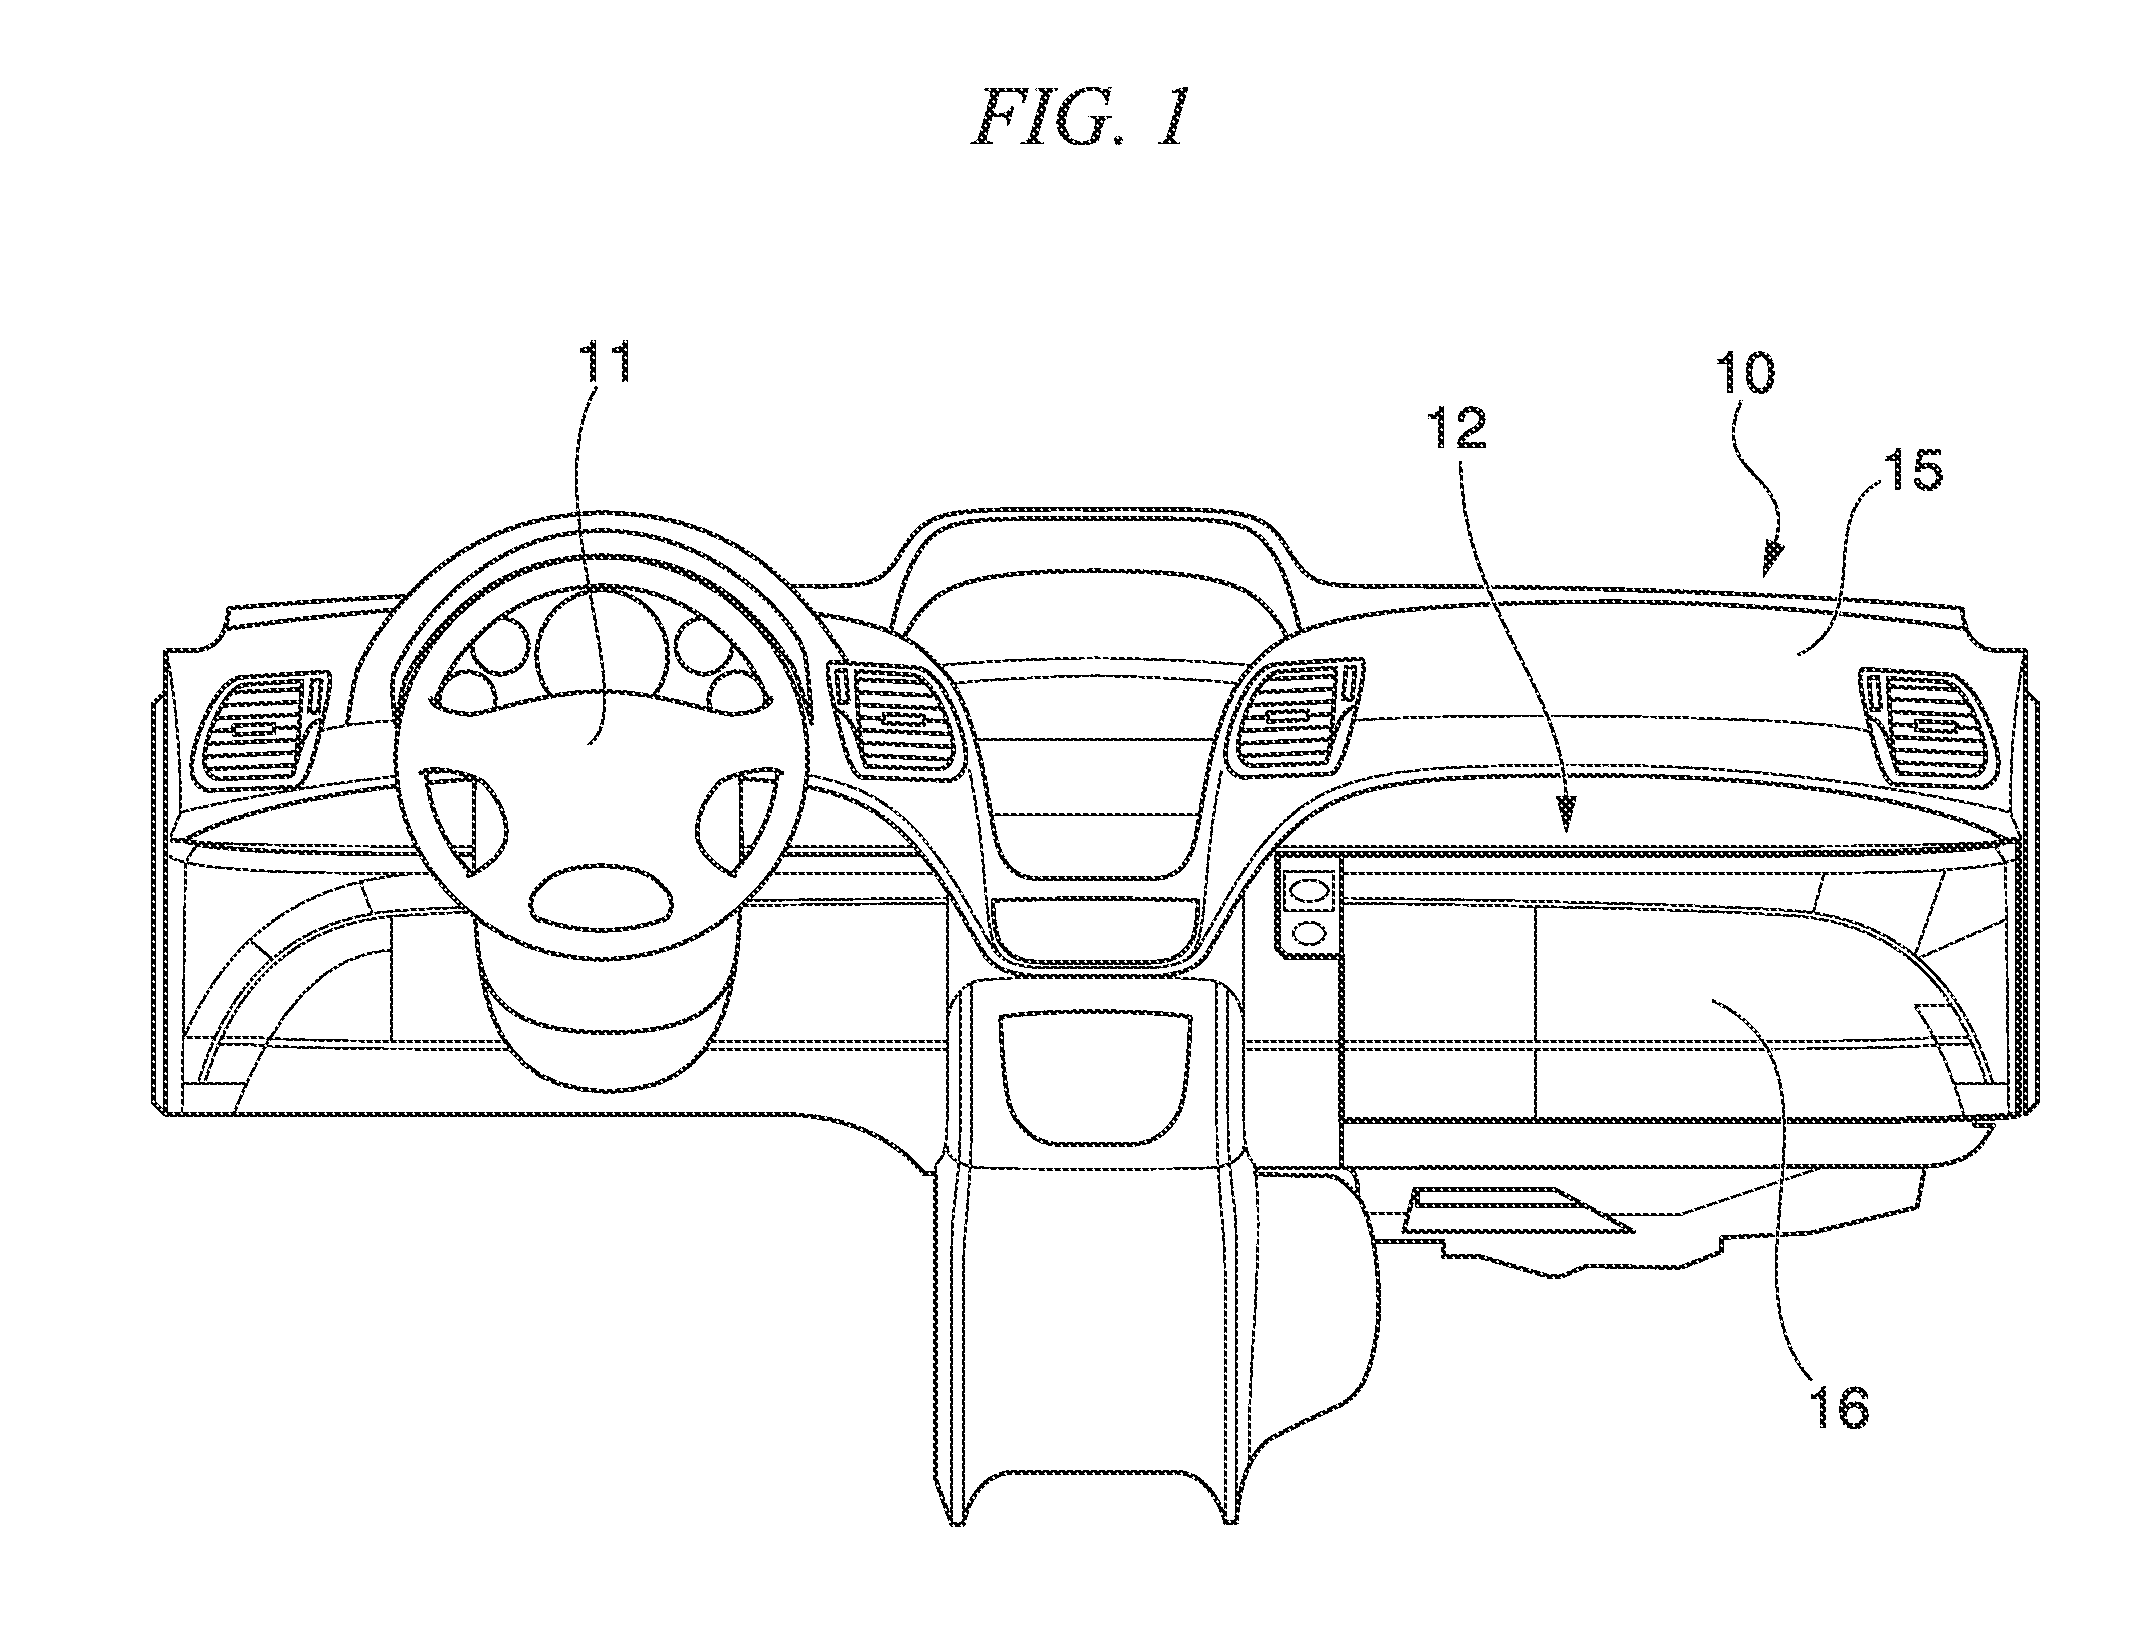 Storage device for vehicle